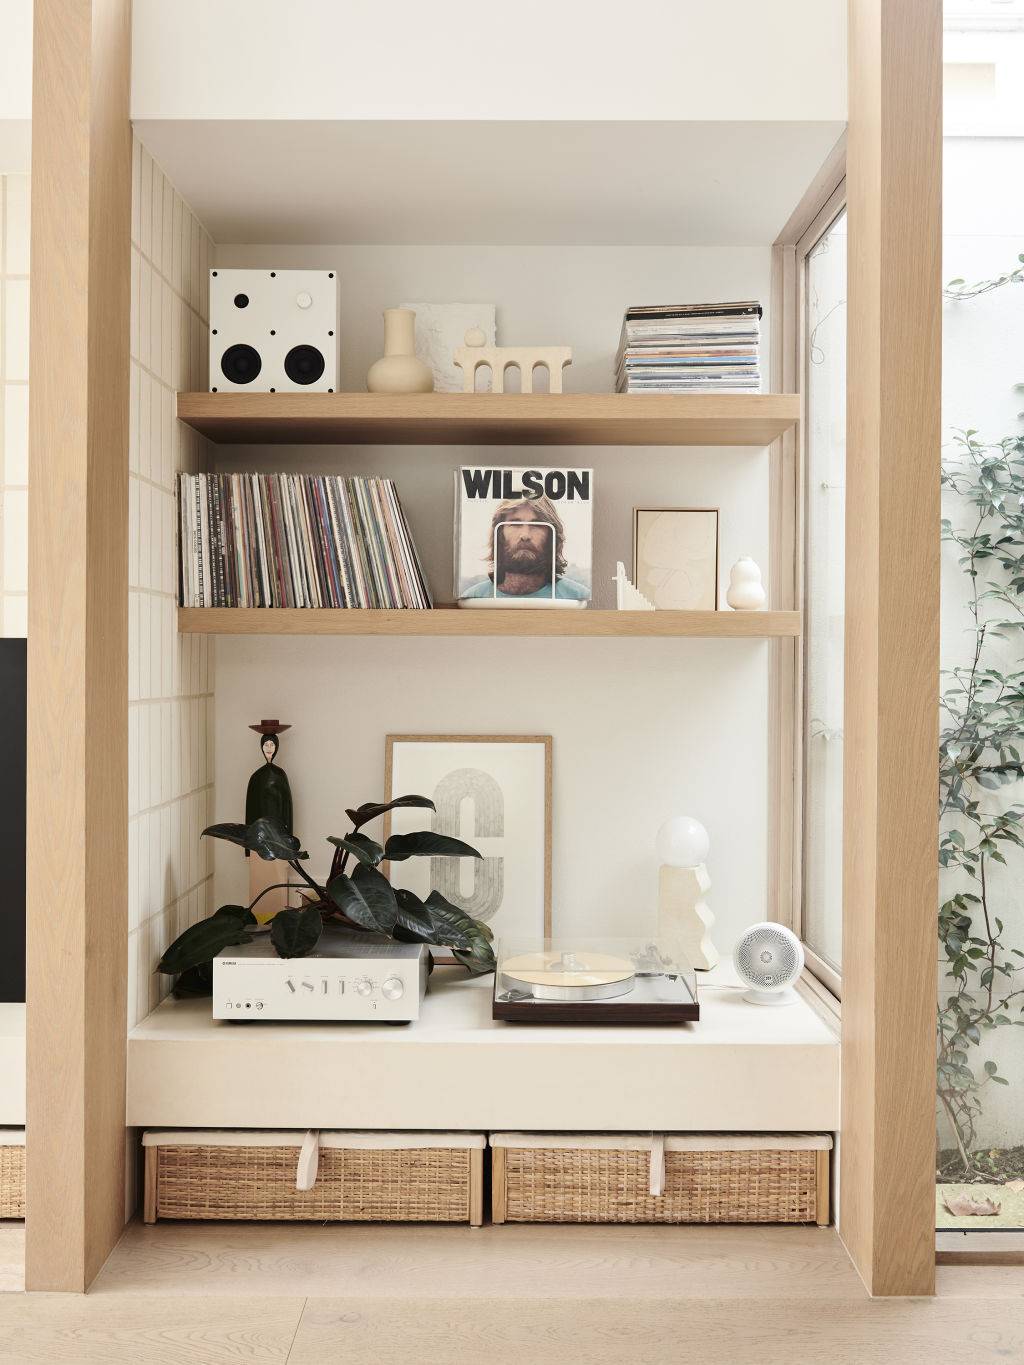 A house without adequate storage is impossible to keep tidy. Photo: Eve Wilson. Styling: Annie Portelli